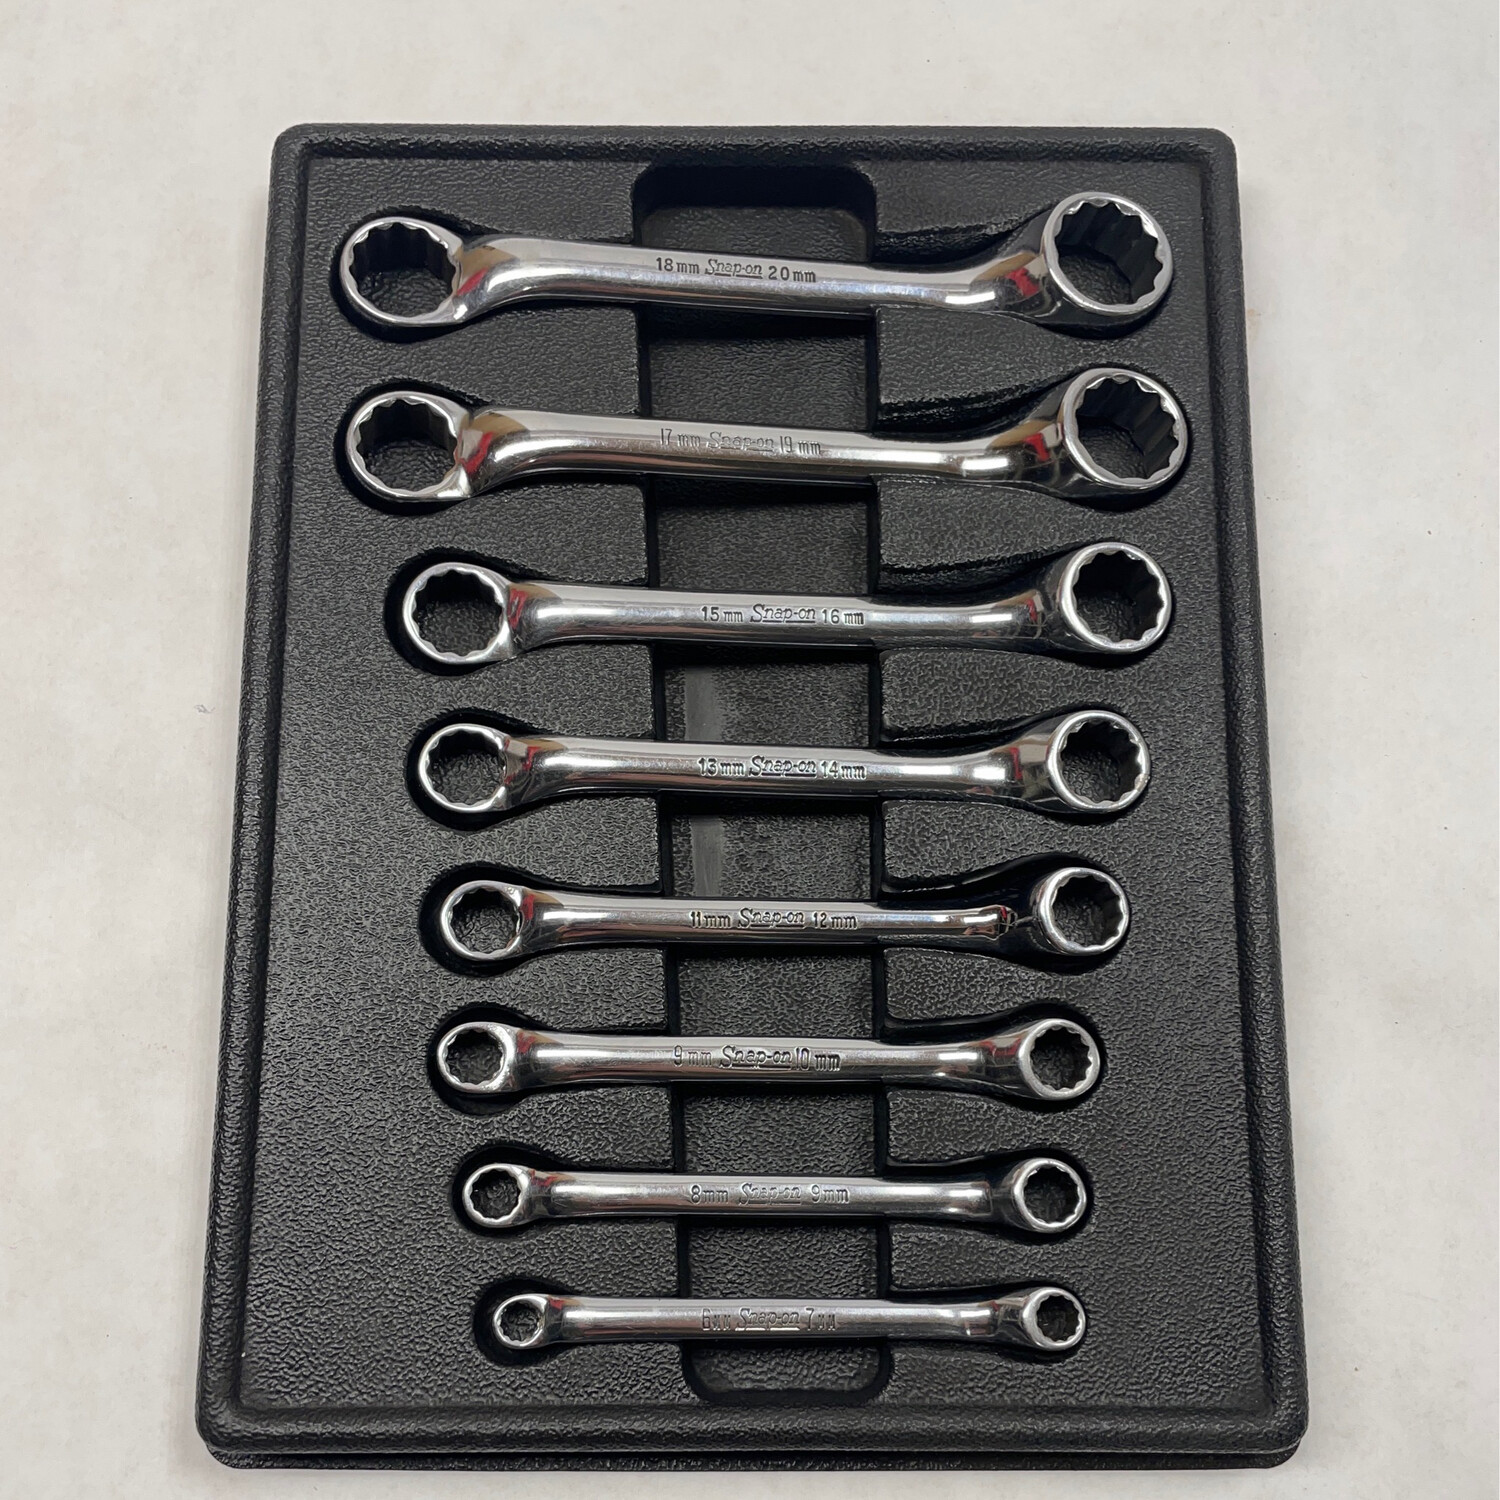 Snap On 8pc Metric Double Box End Wrench Set, 6mm-20mm